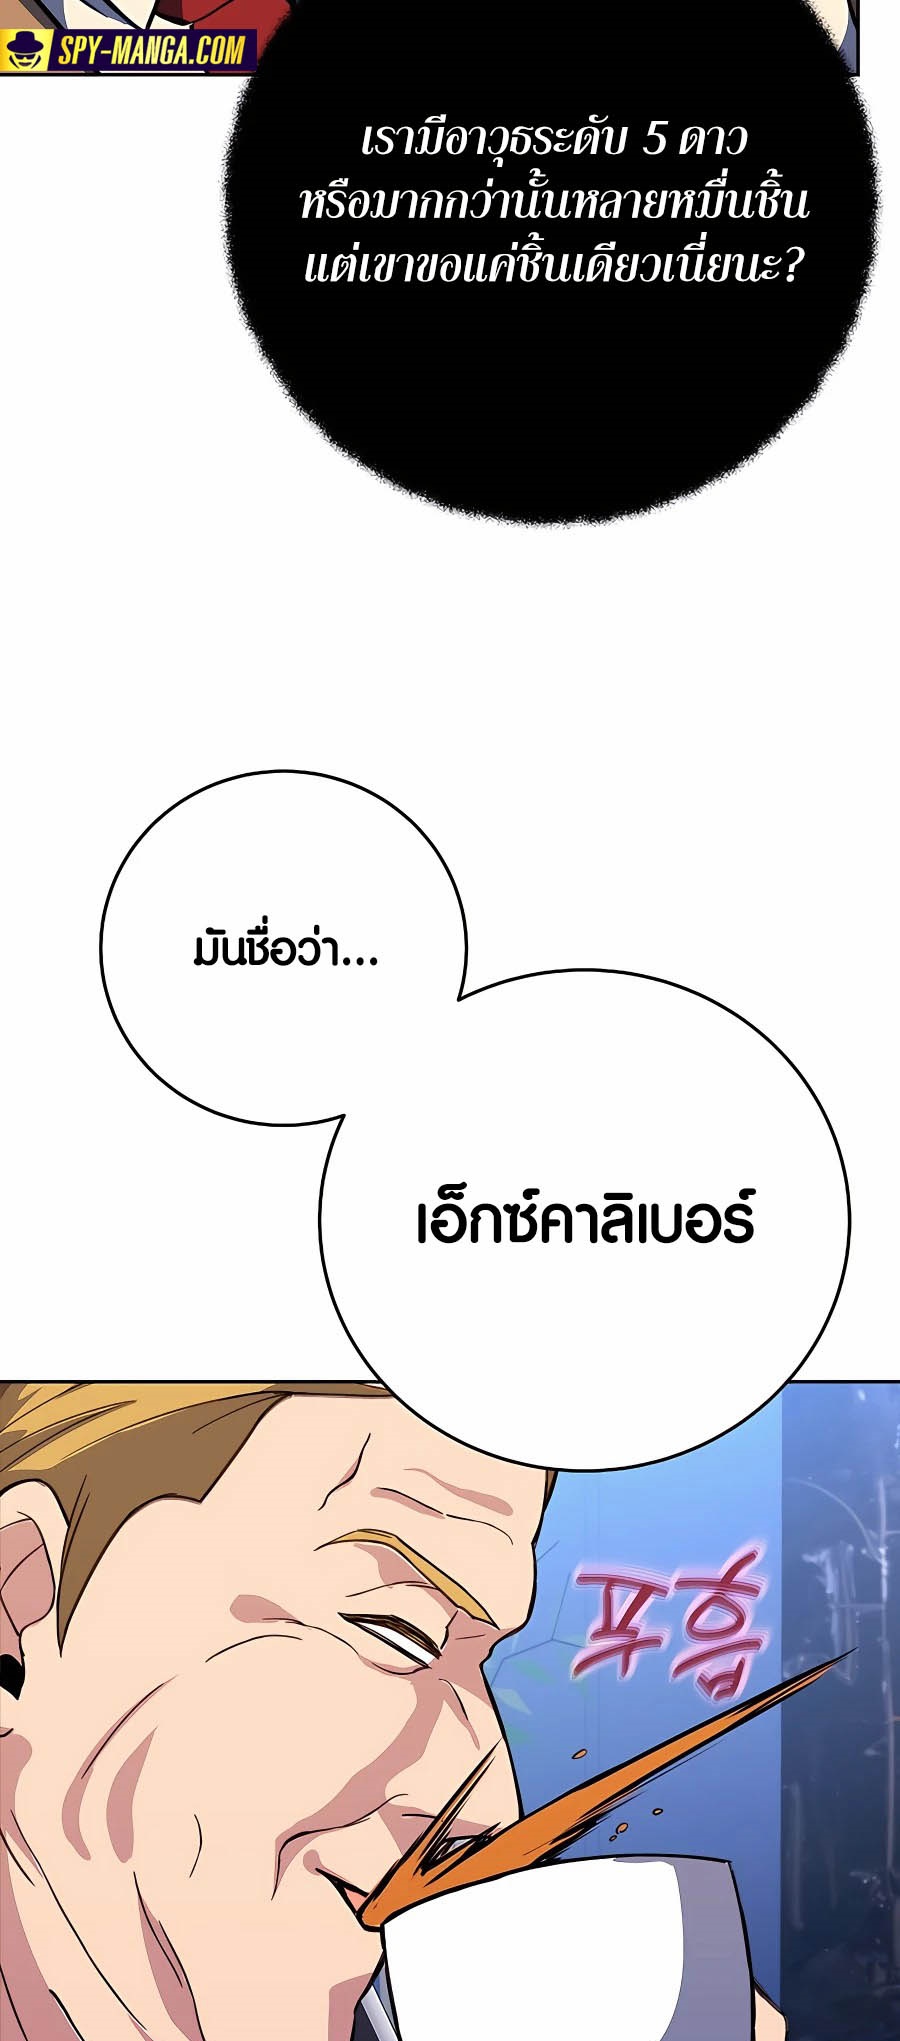 à¸­à¹ˆà¸²à¸™à¸¡à¸±à¸™à¸®à¸§à¸² à¹€à¸£à¸·à¹ˆà¸­à¸‡ The Part Time Land of the Gods 56 25